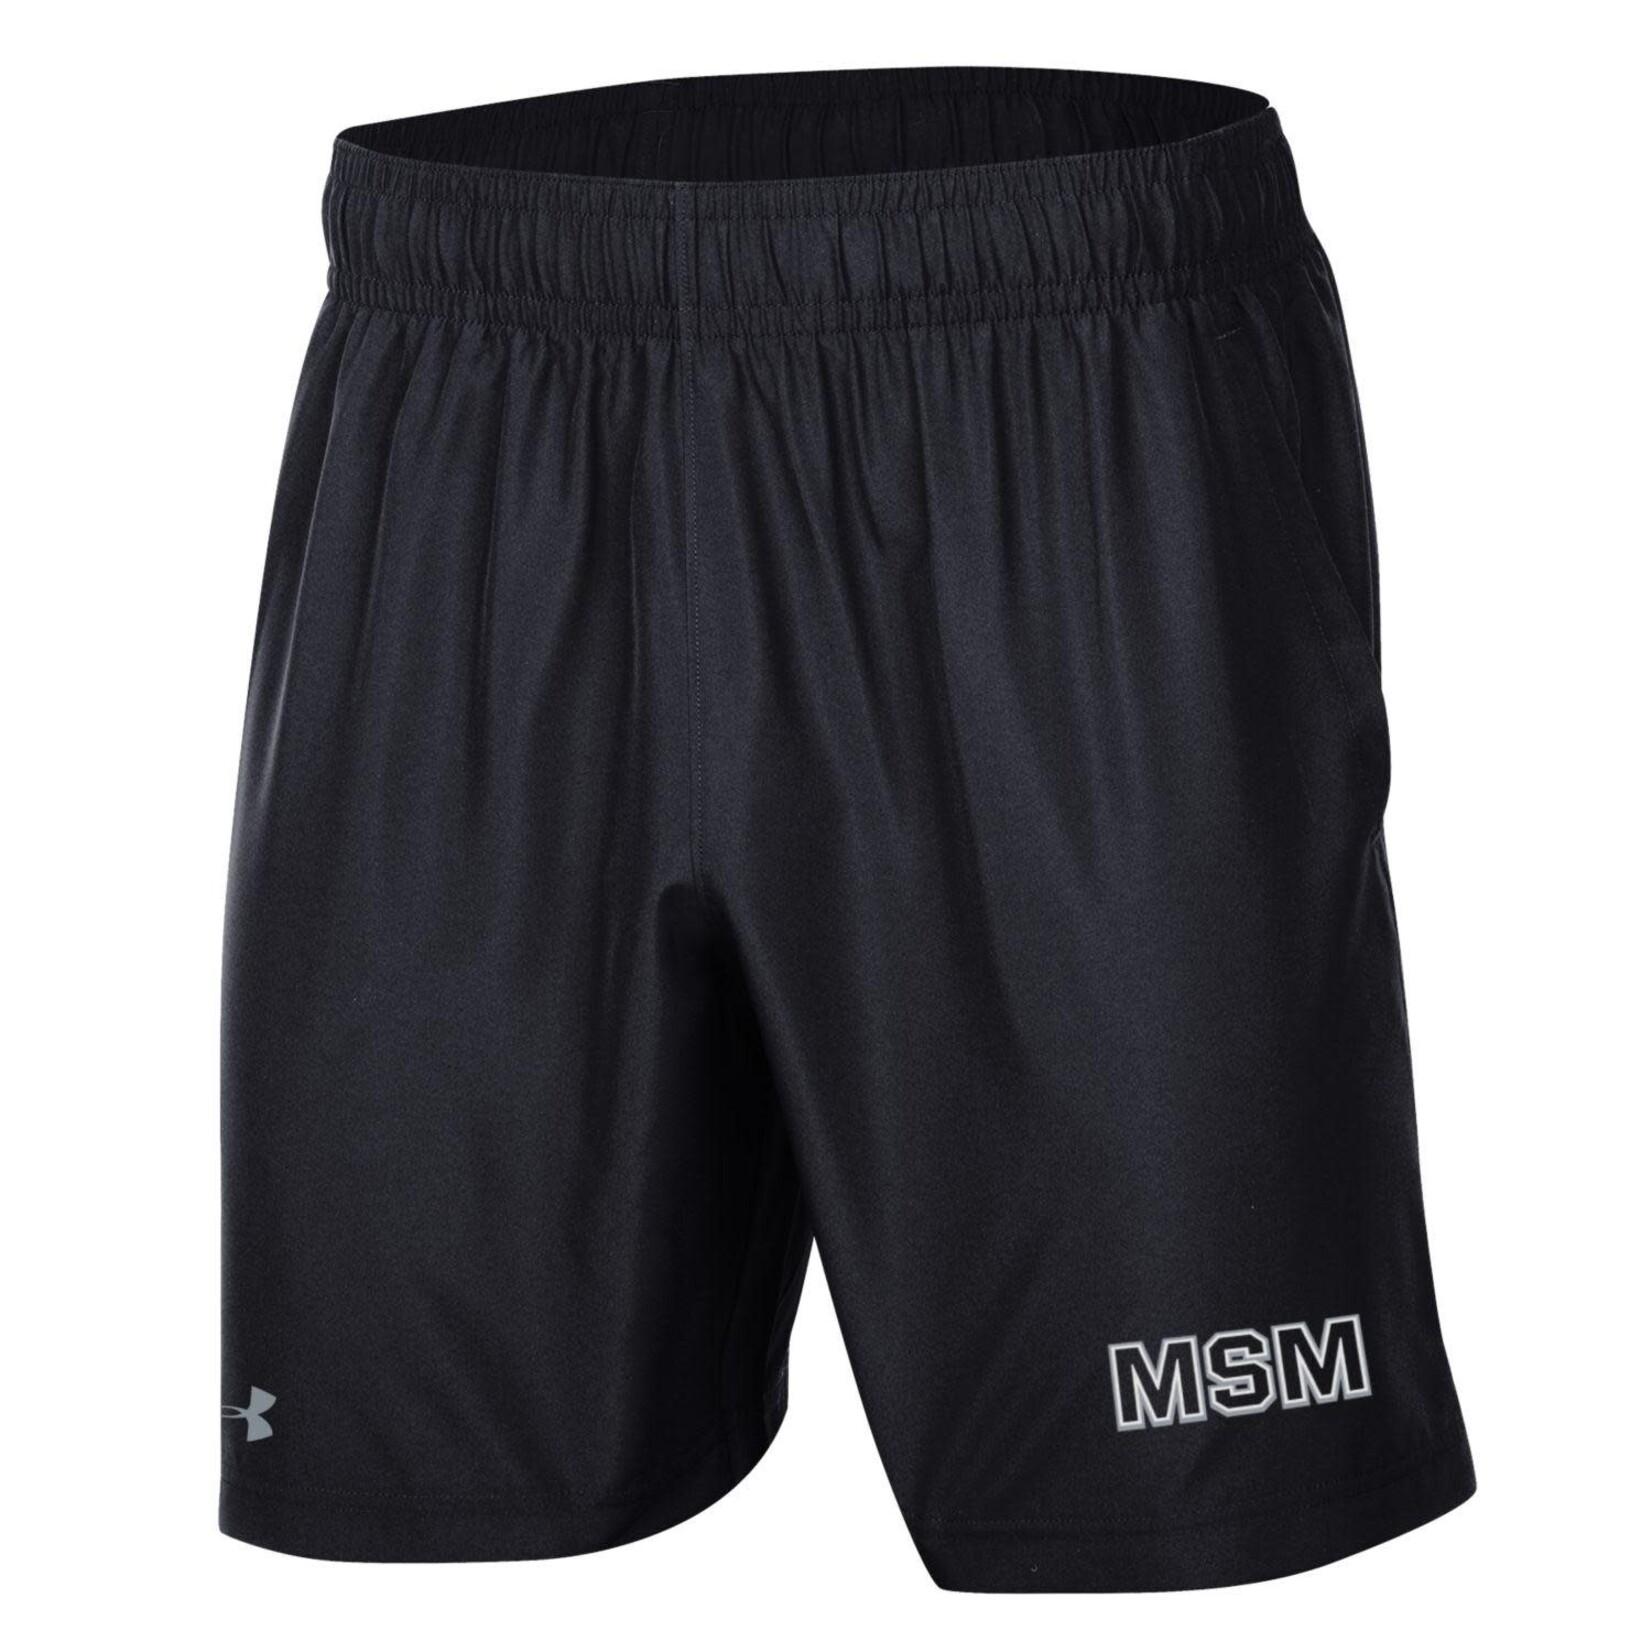 Under Armour Shorts: Black with Silver Chrome MSM